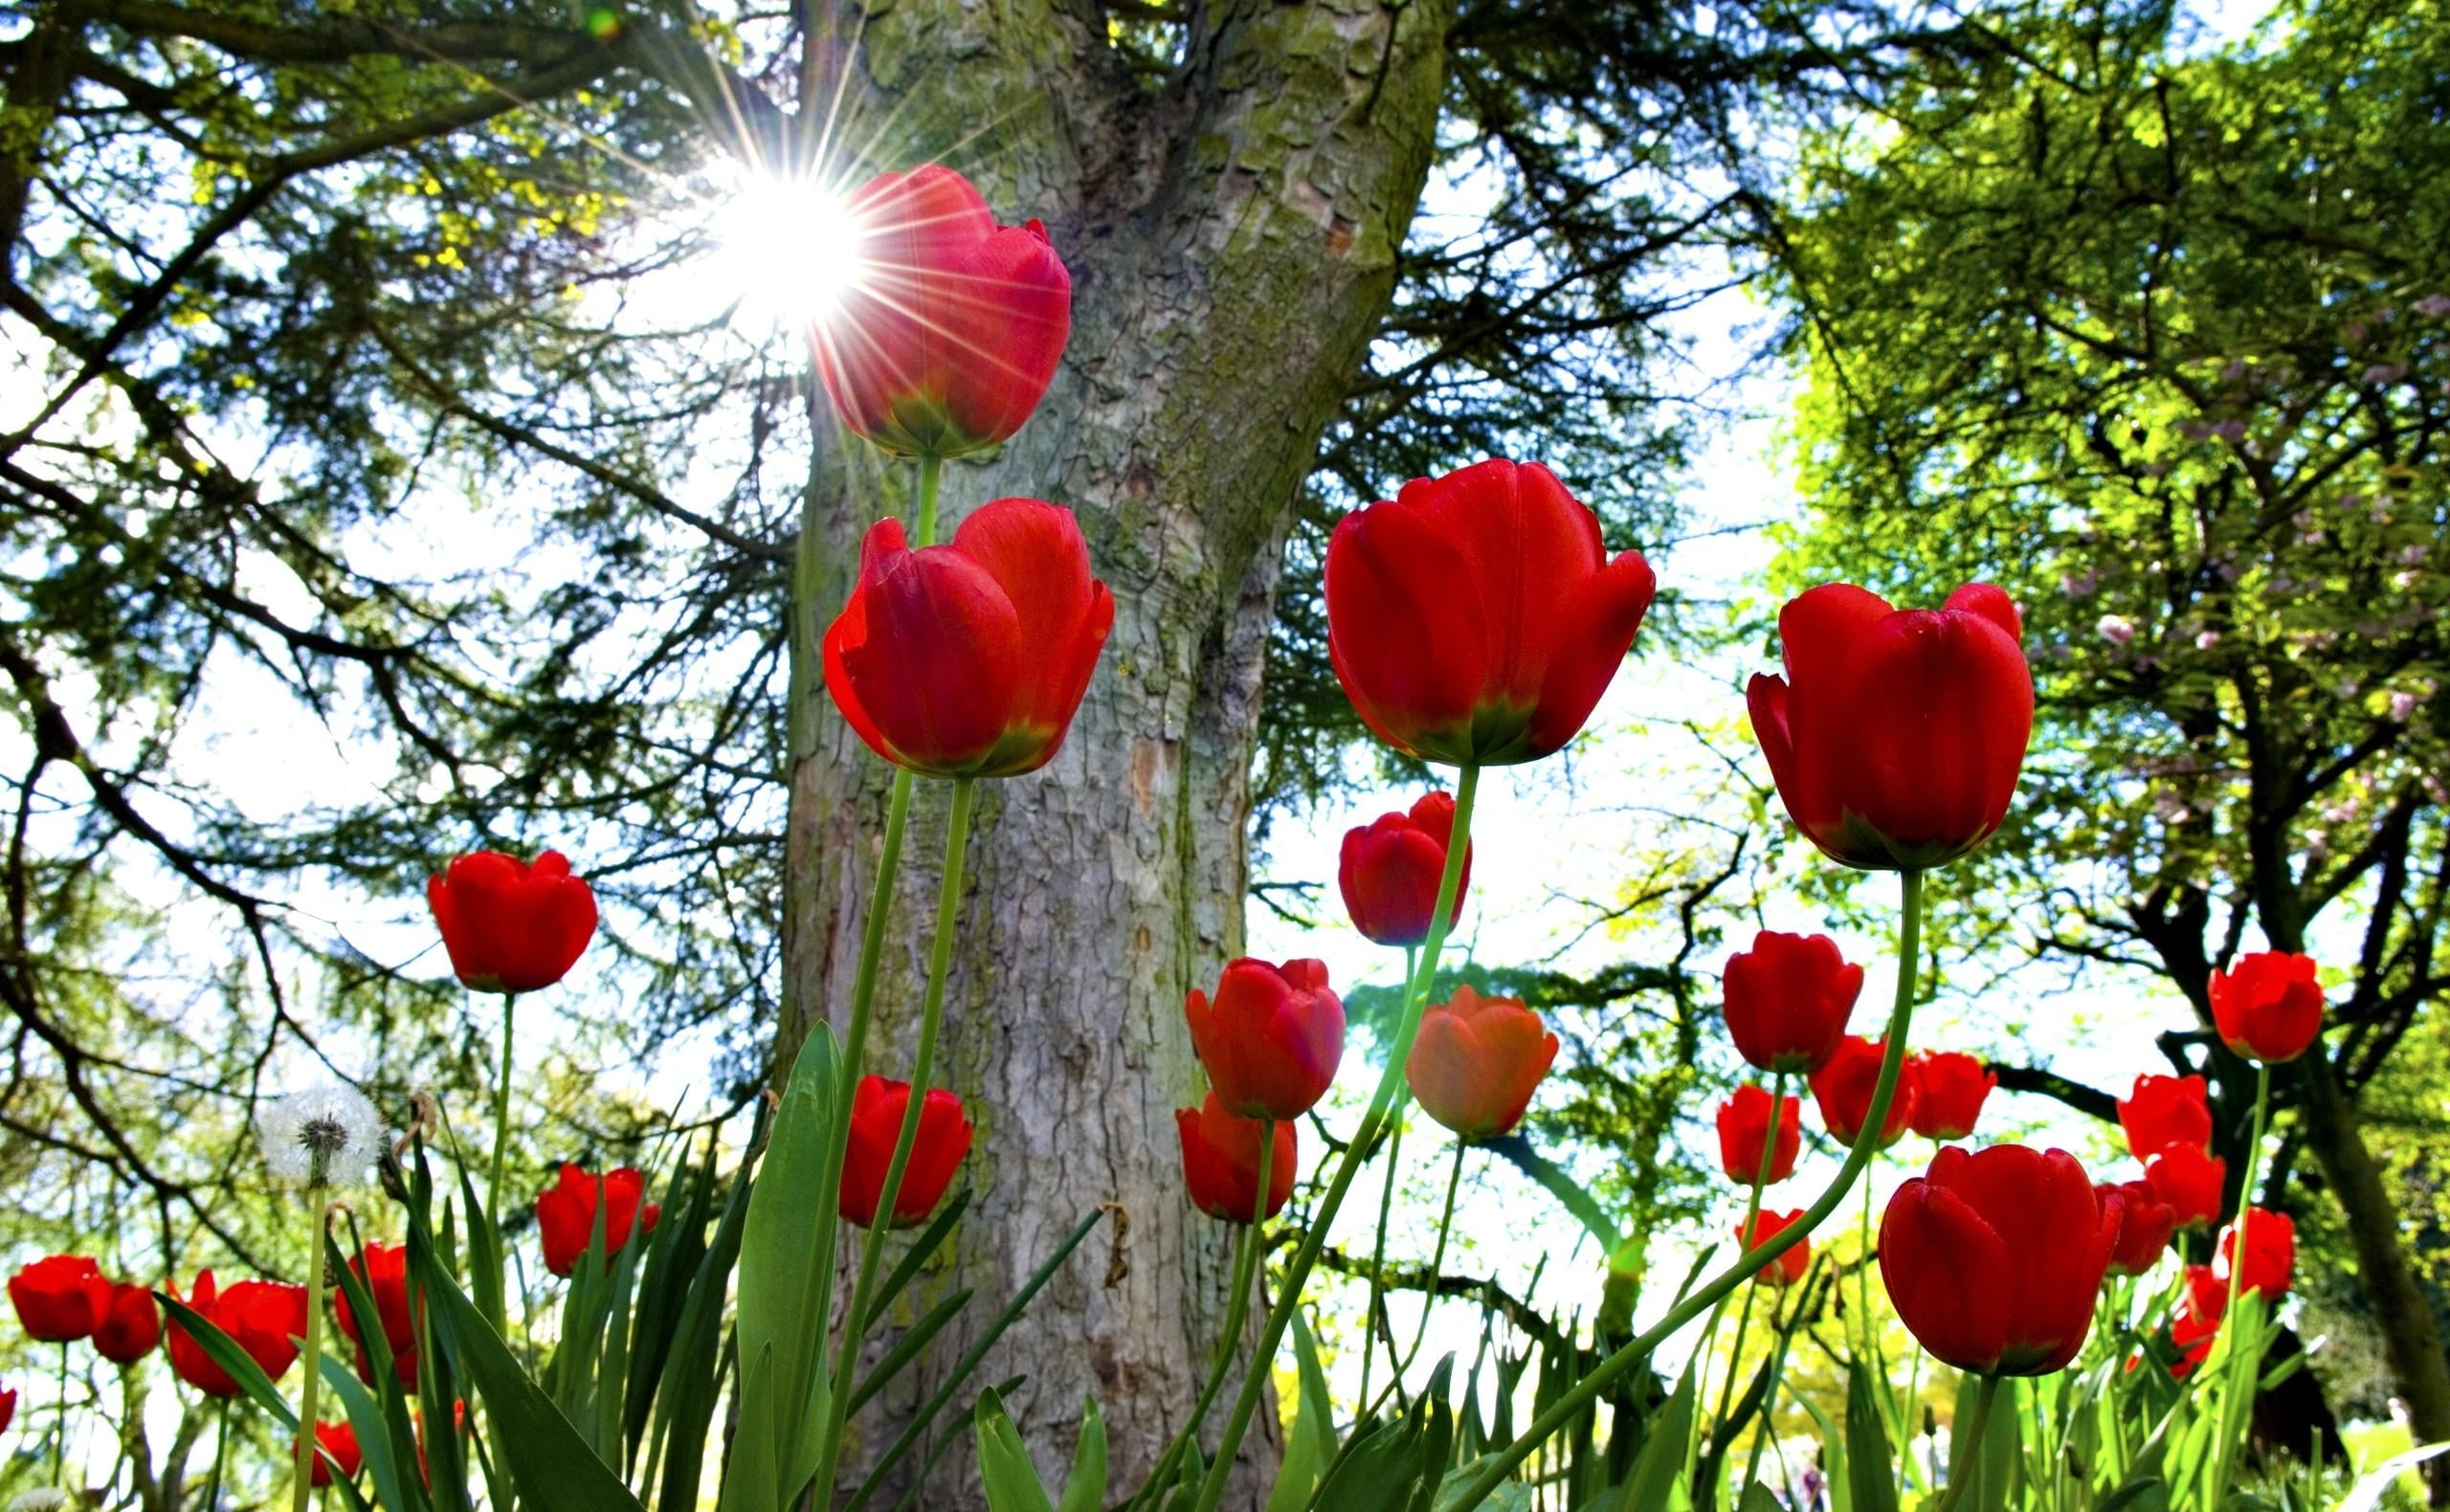 red tulip field, tulips, flowerbed, sun, park, trees, nature